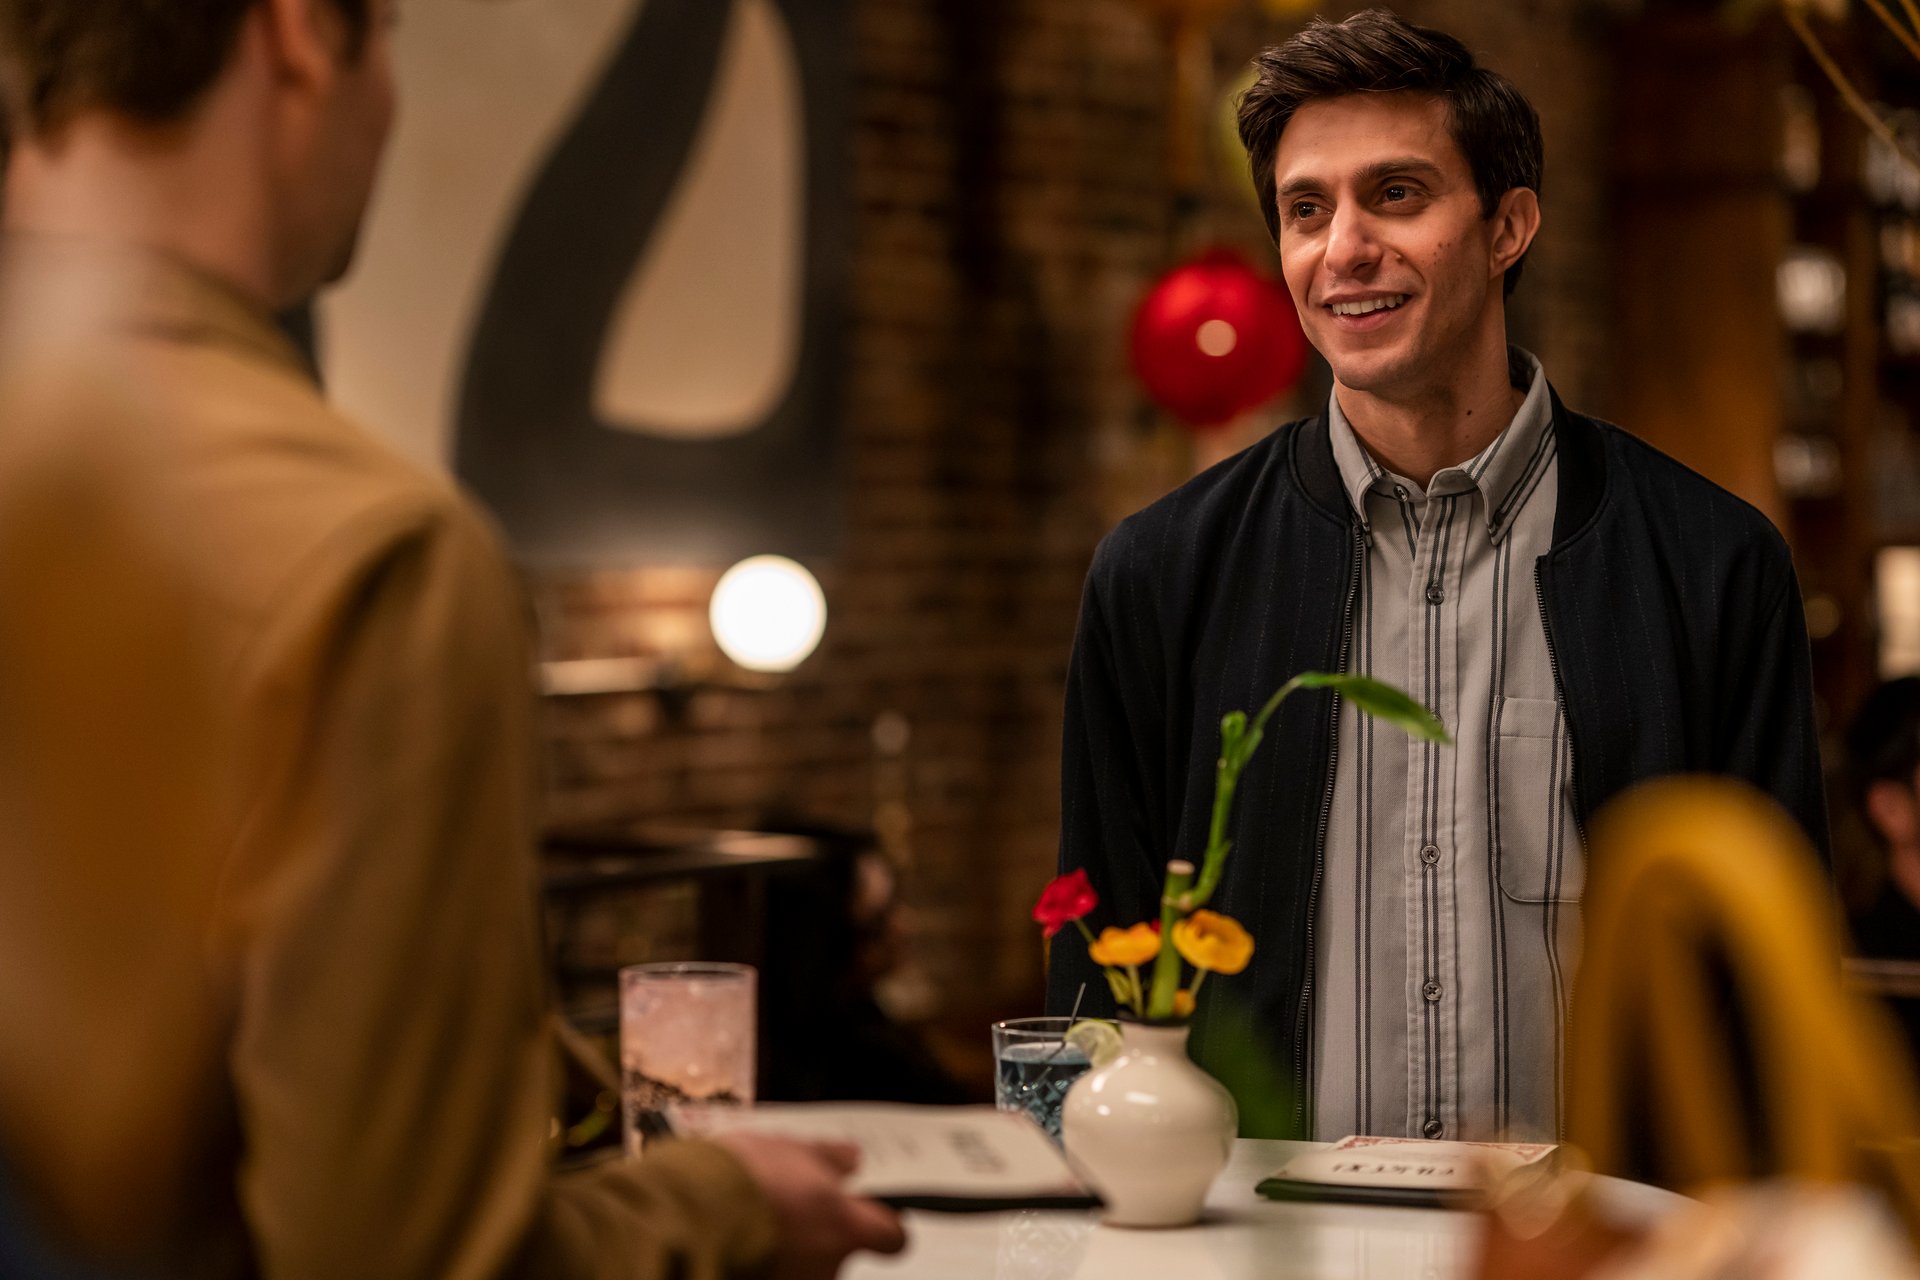 Gideon Glick wears a striped shirt and jacket in a bar in 'The Other Two.'